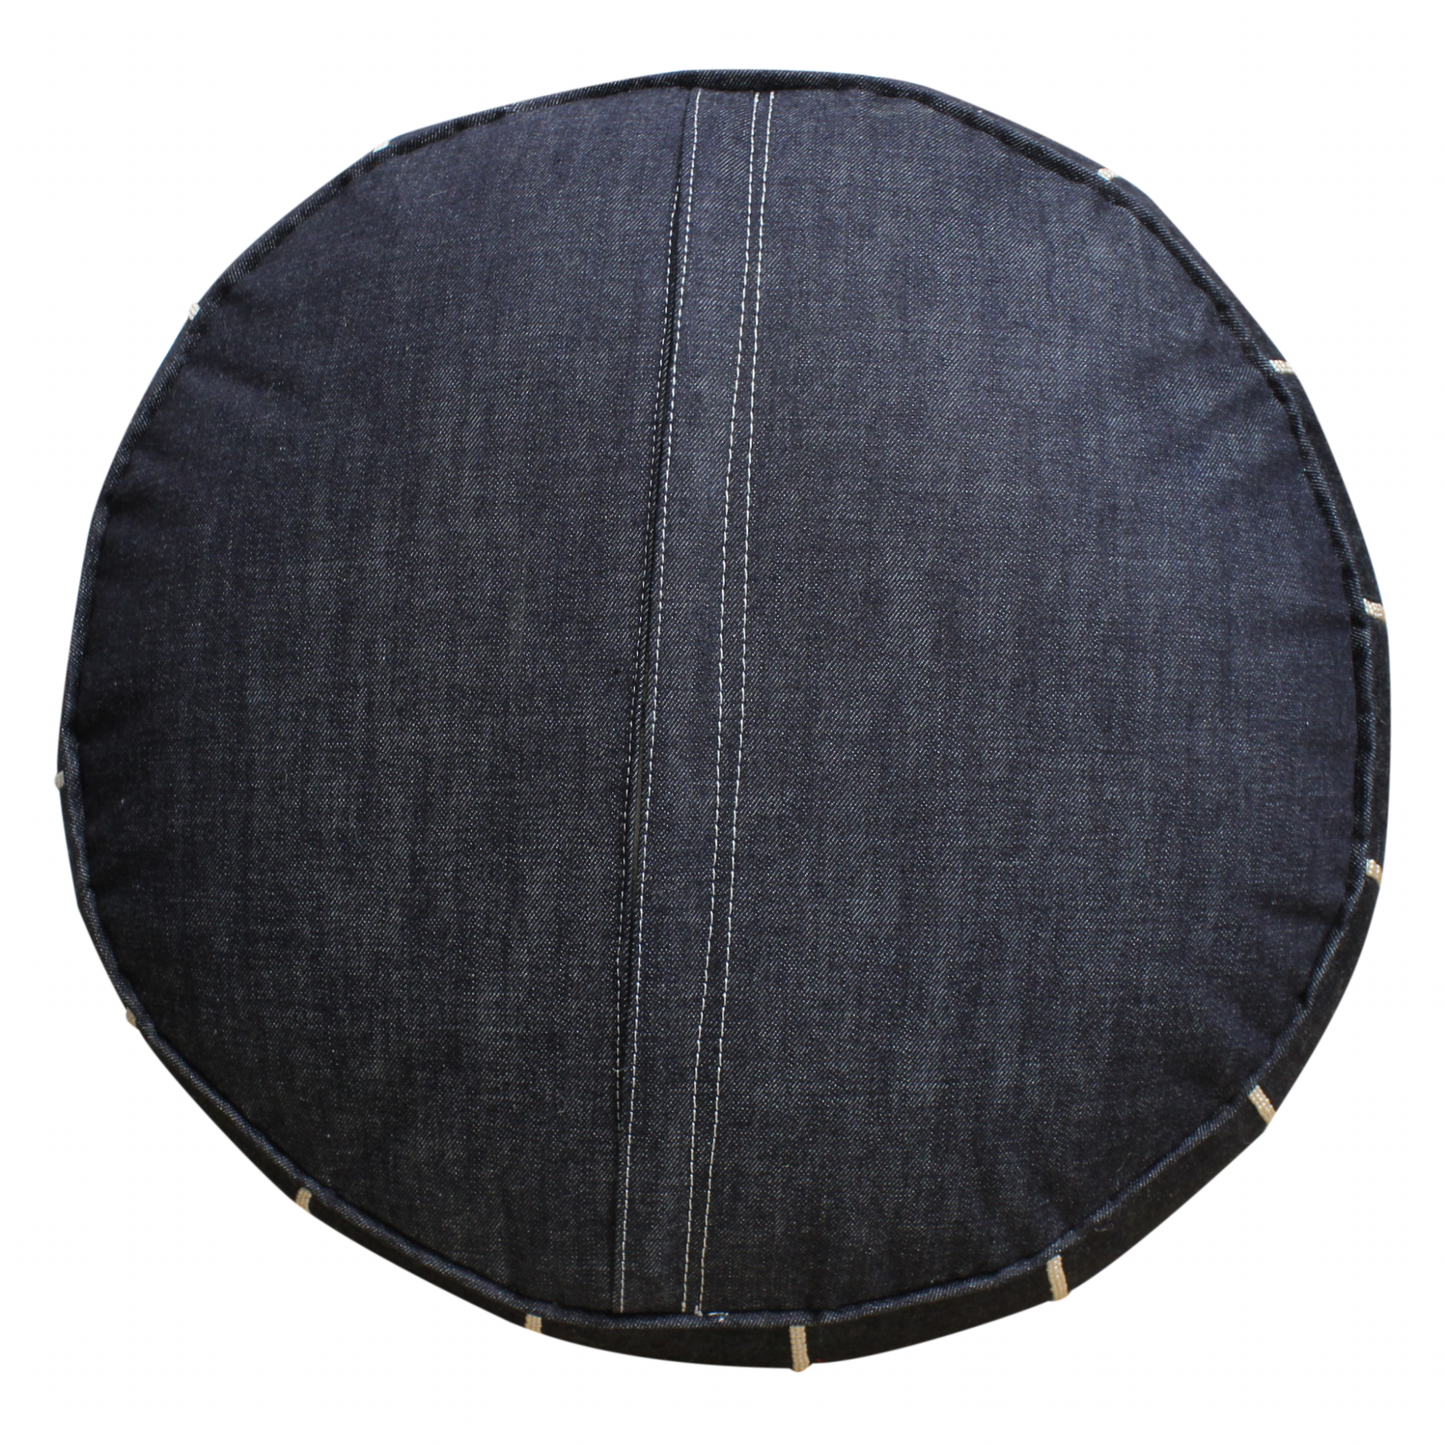 moroccan-leather-denim-pouffe-pouf-ottoman-footstool-cover-only-or-stuffed-blue-jean-leather-cover-only-or-stuffed